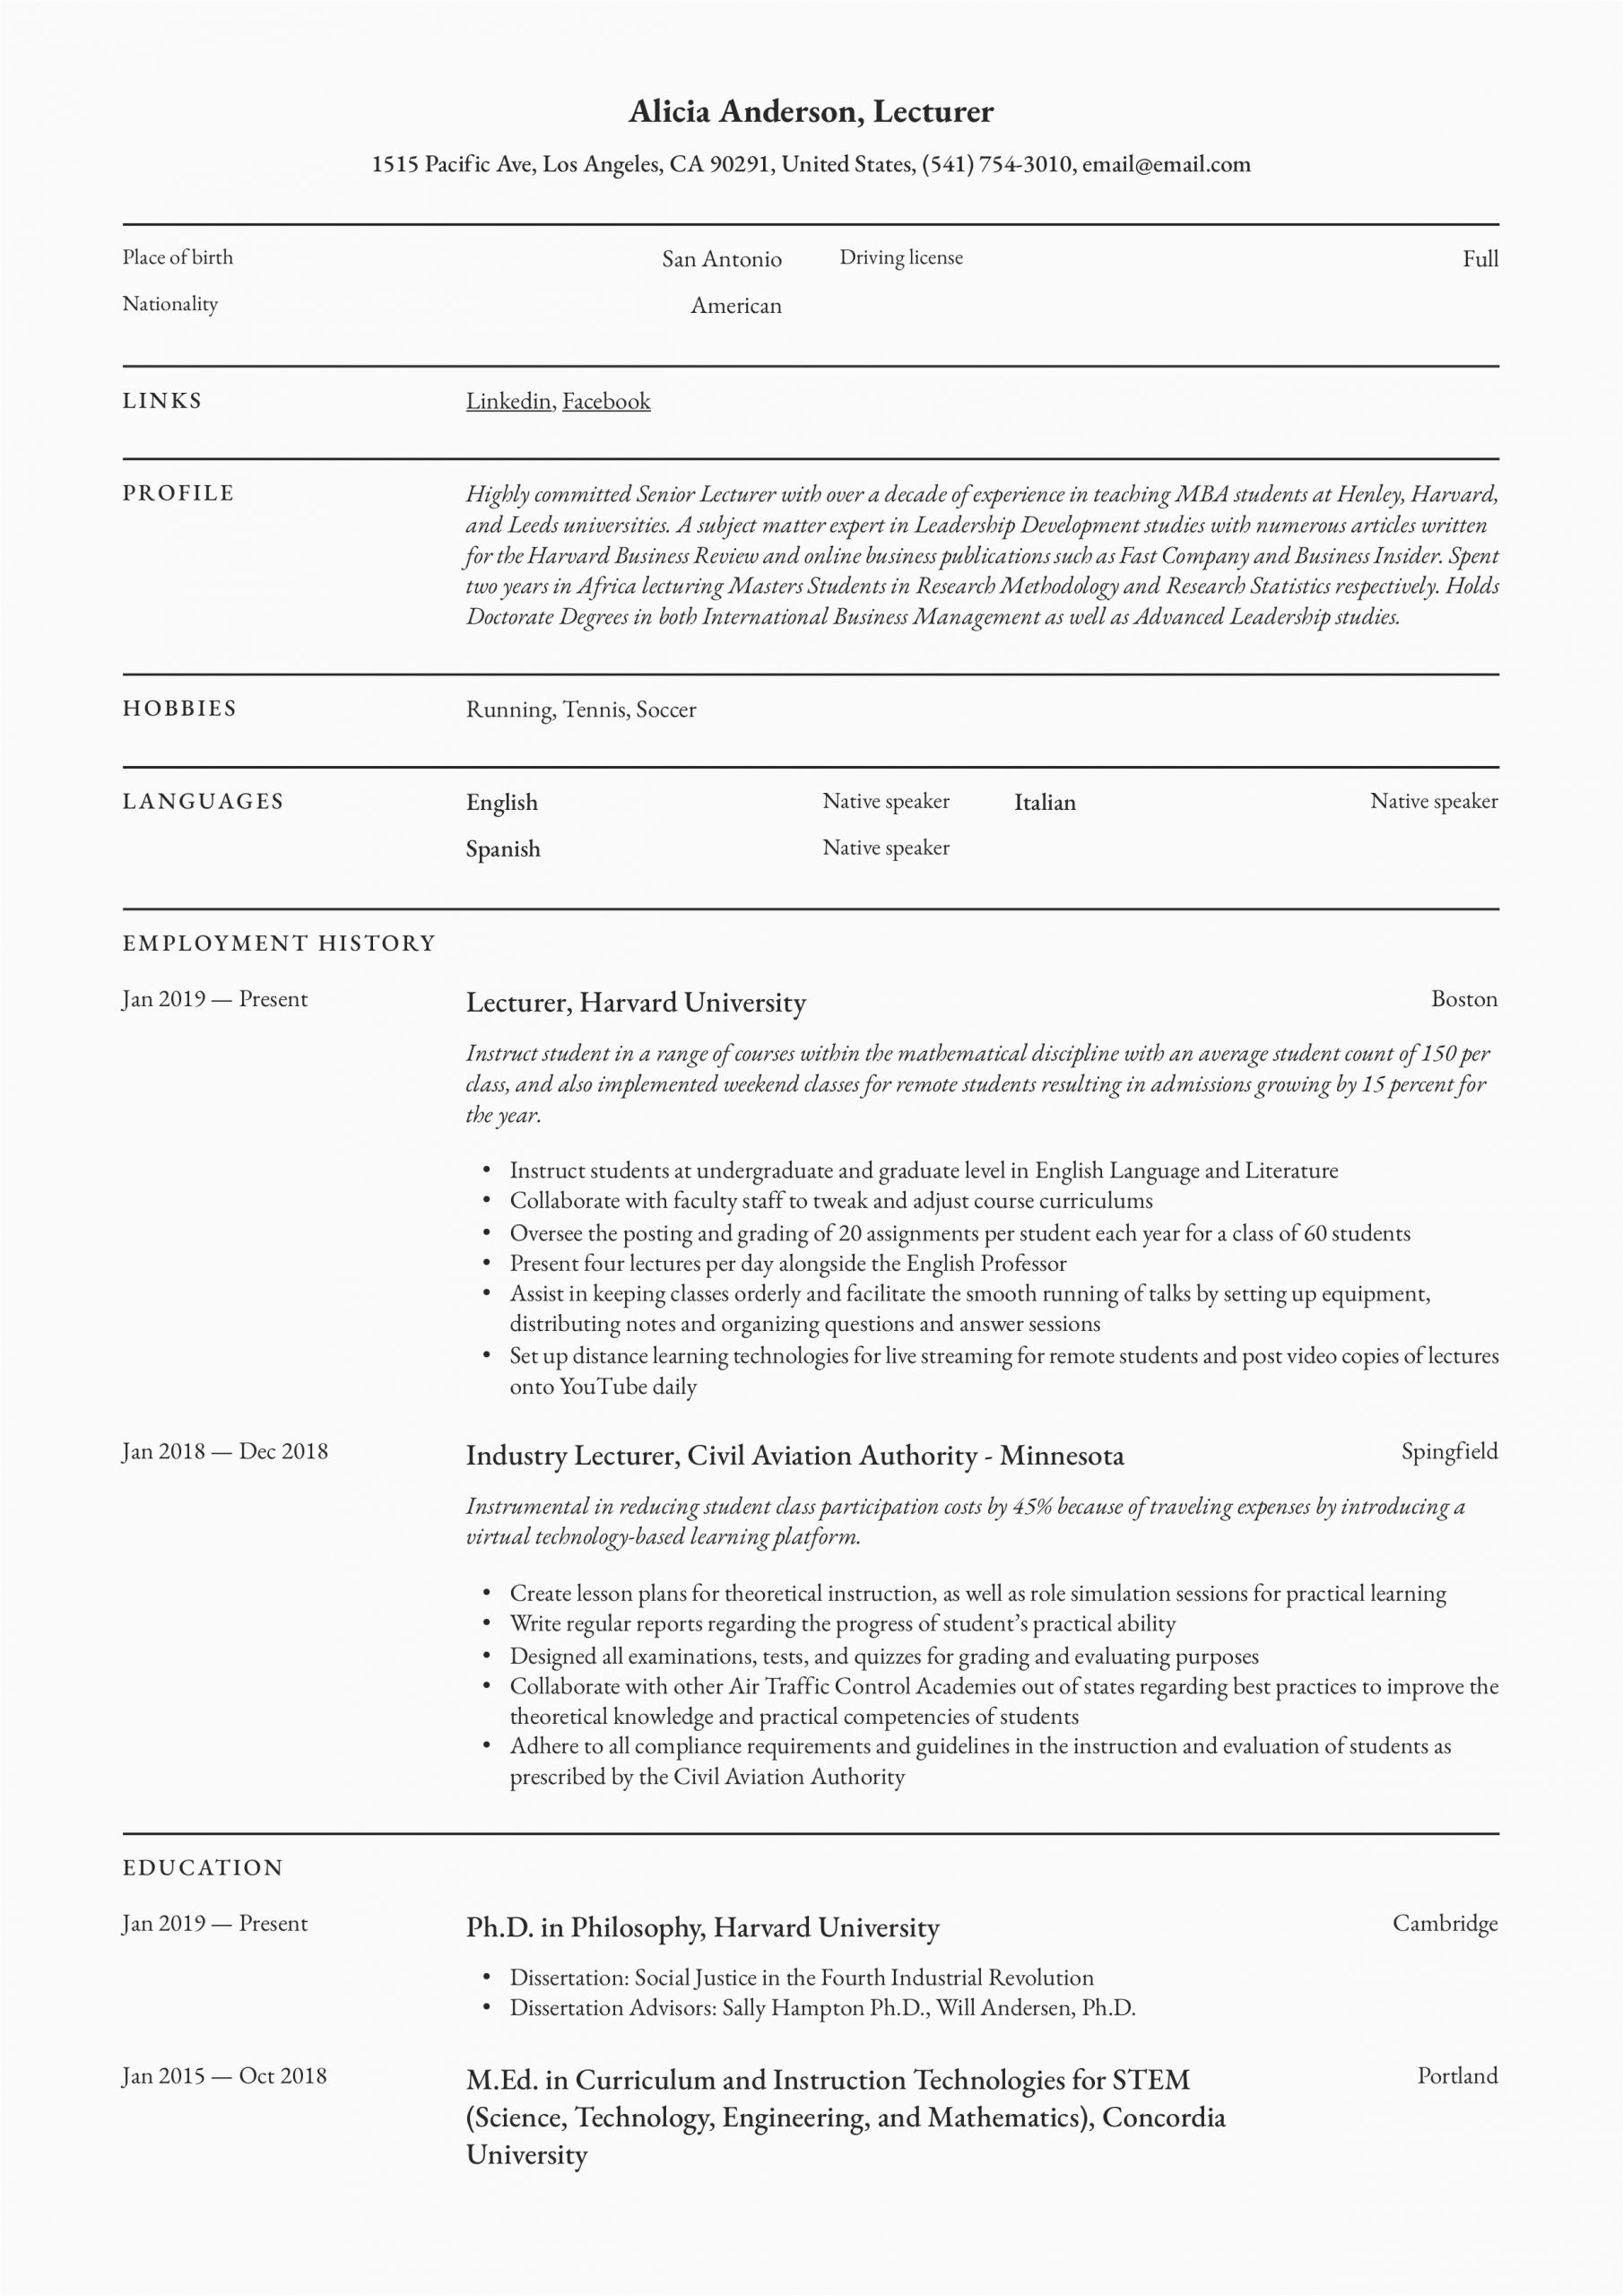 Sample Resume for Faculty Position In Engineering College Sample Cv for Lecturer Position In University Pdf Cv